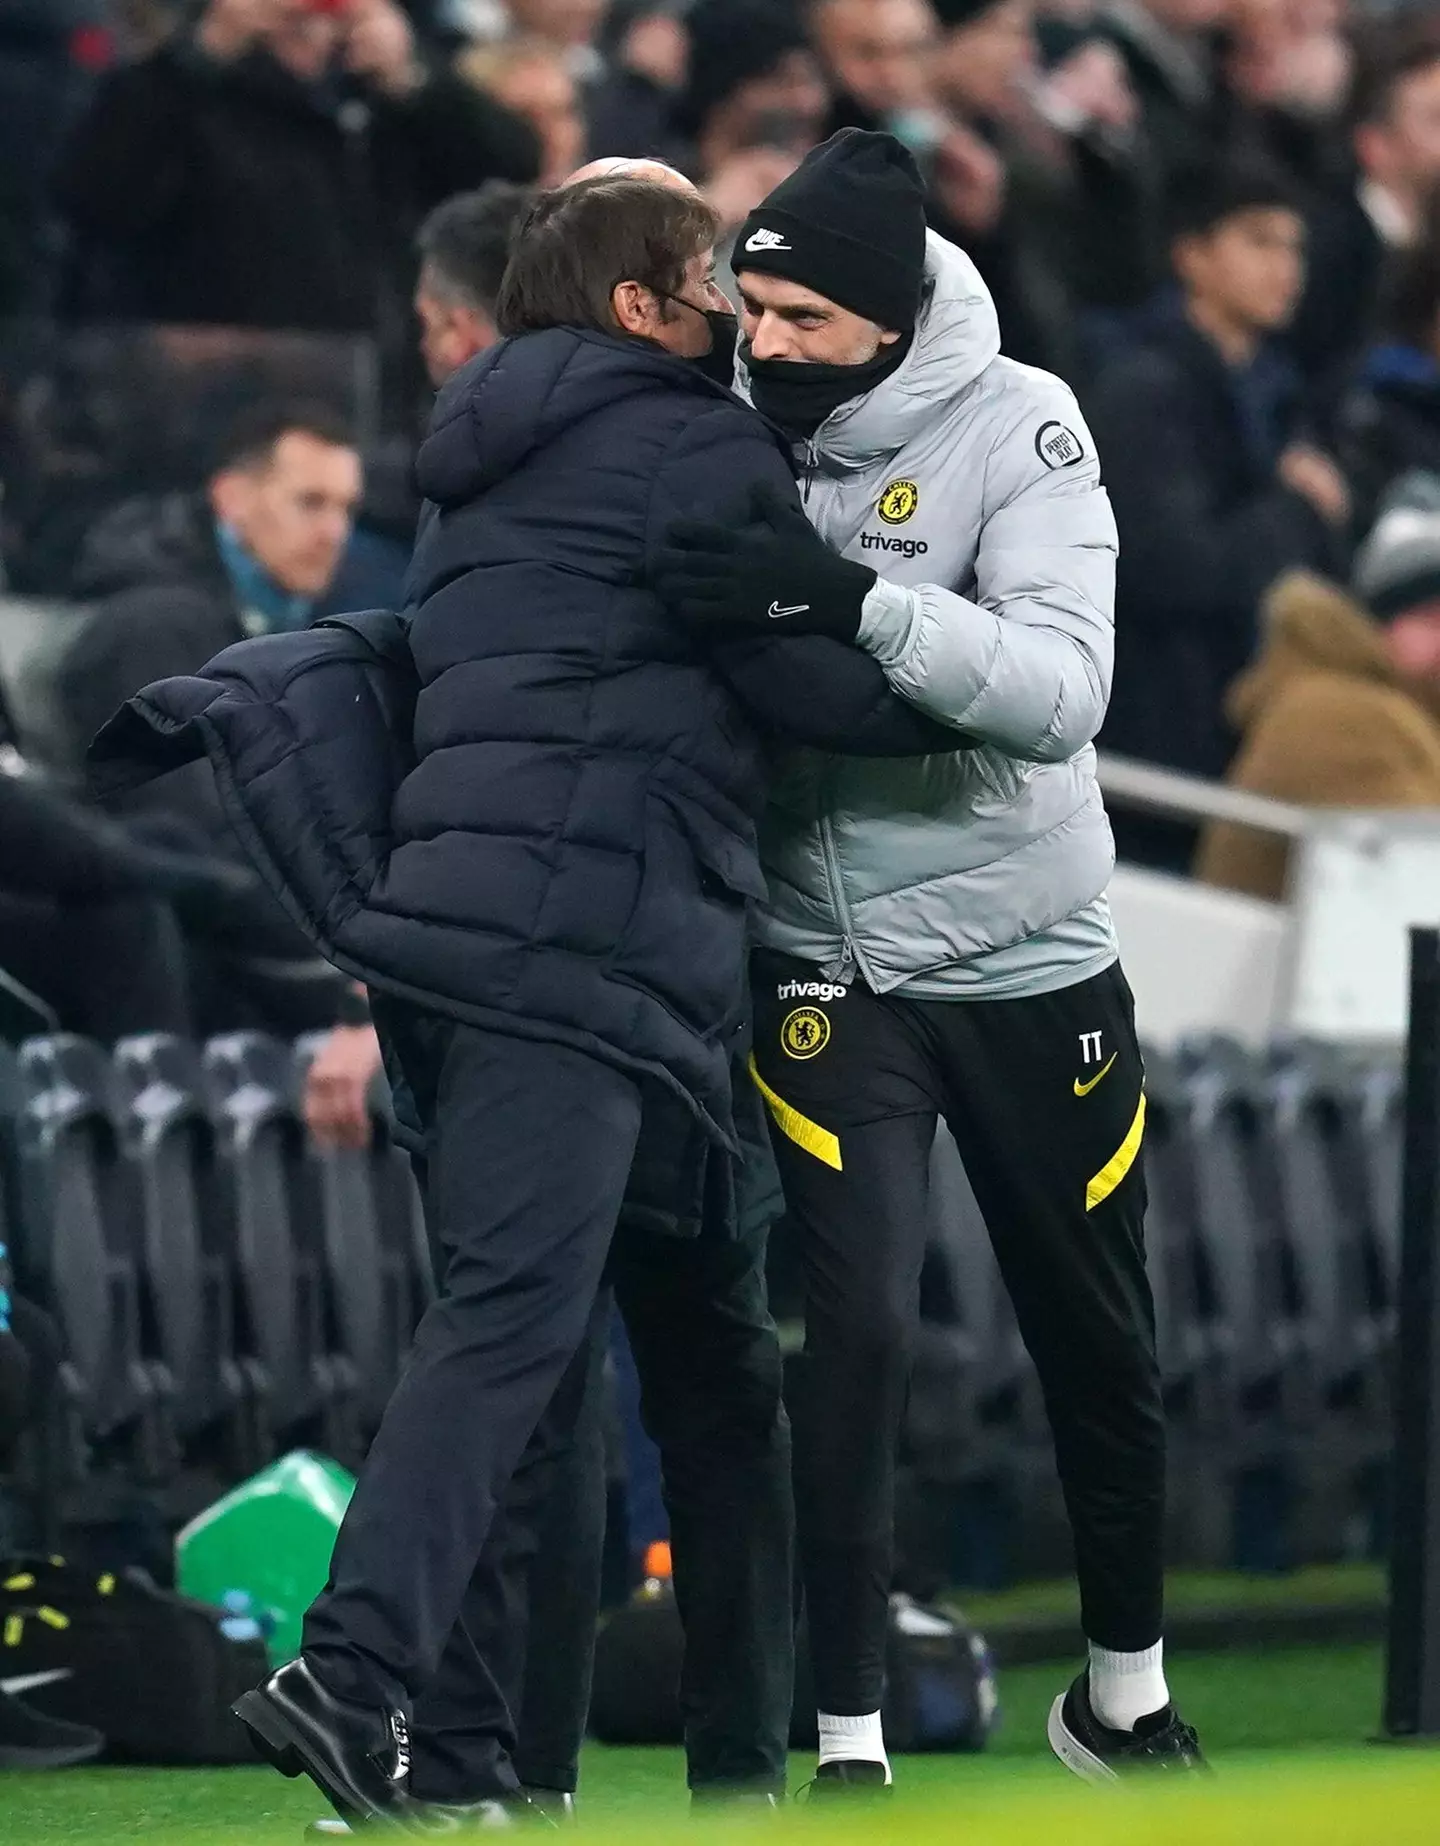 Tottenham Hotspur manager Antonio Conte (left) shakes hands with Chelsea manager Thomas Tuchel before the Carabao Cup Semi Final. (Alamy)